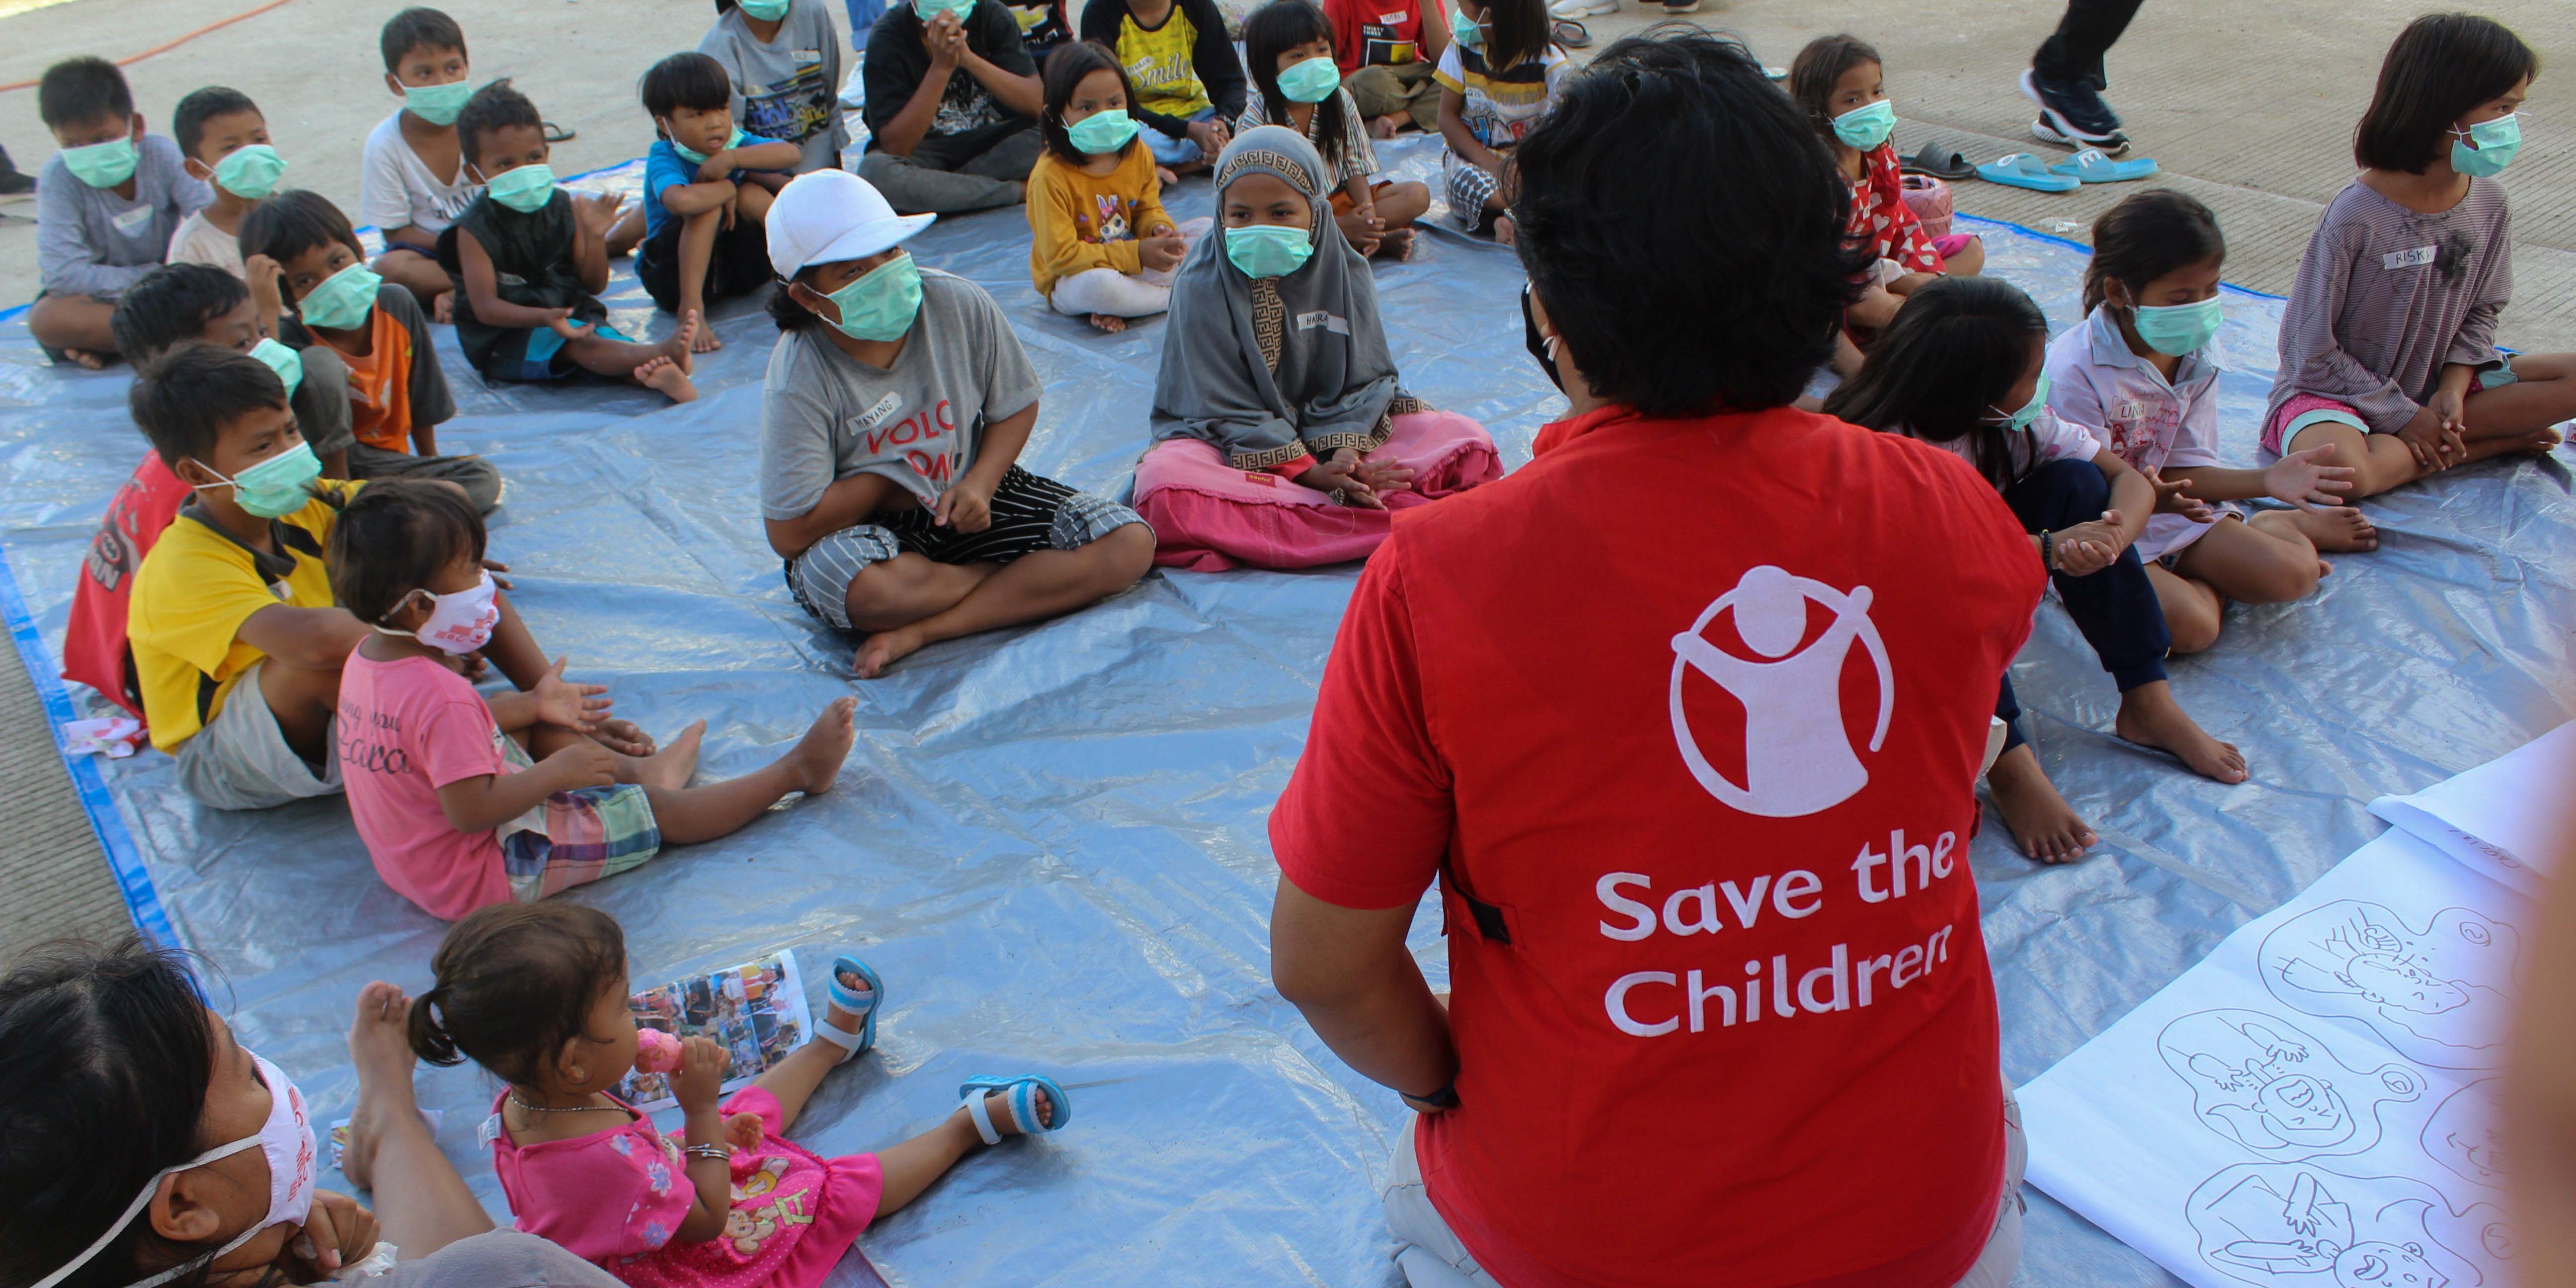 The Save the Children response team educates children in Mamuju, Indonesia, about the dangers of COVID-19 and how to prevent it.